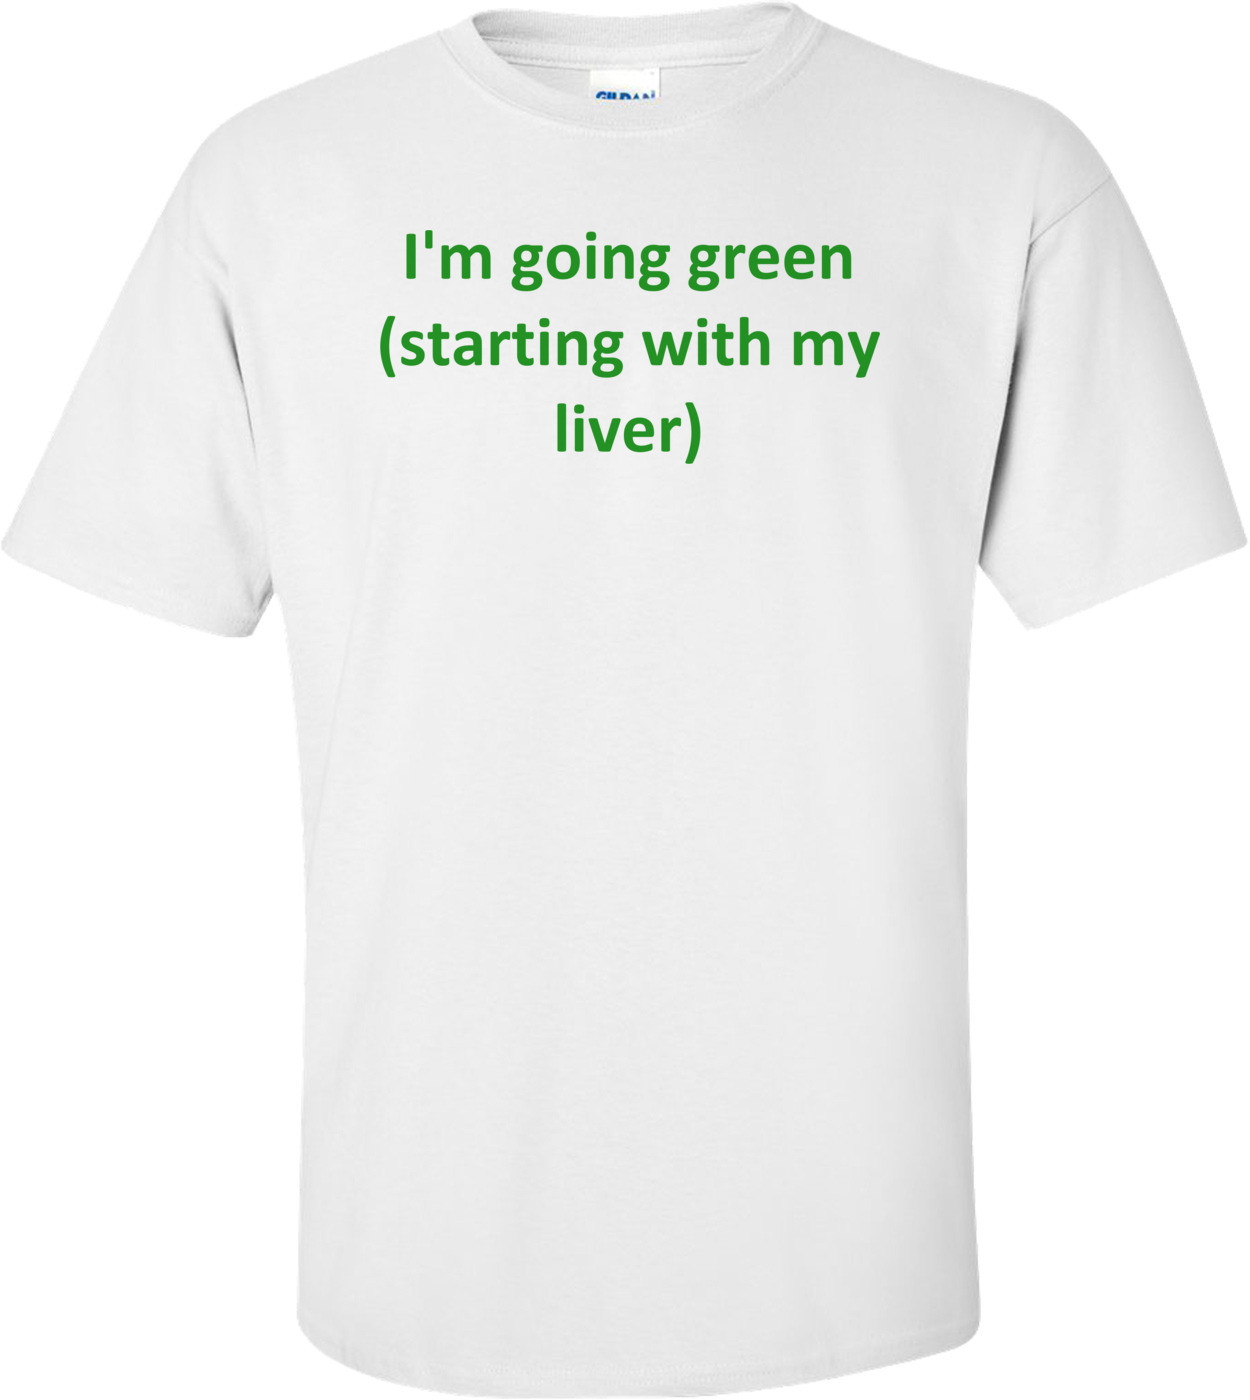 I'm going green (starting with my liver)